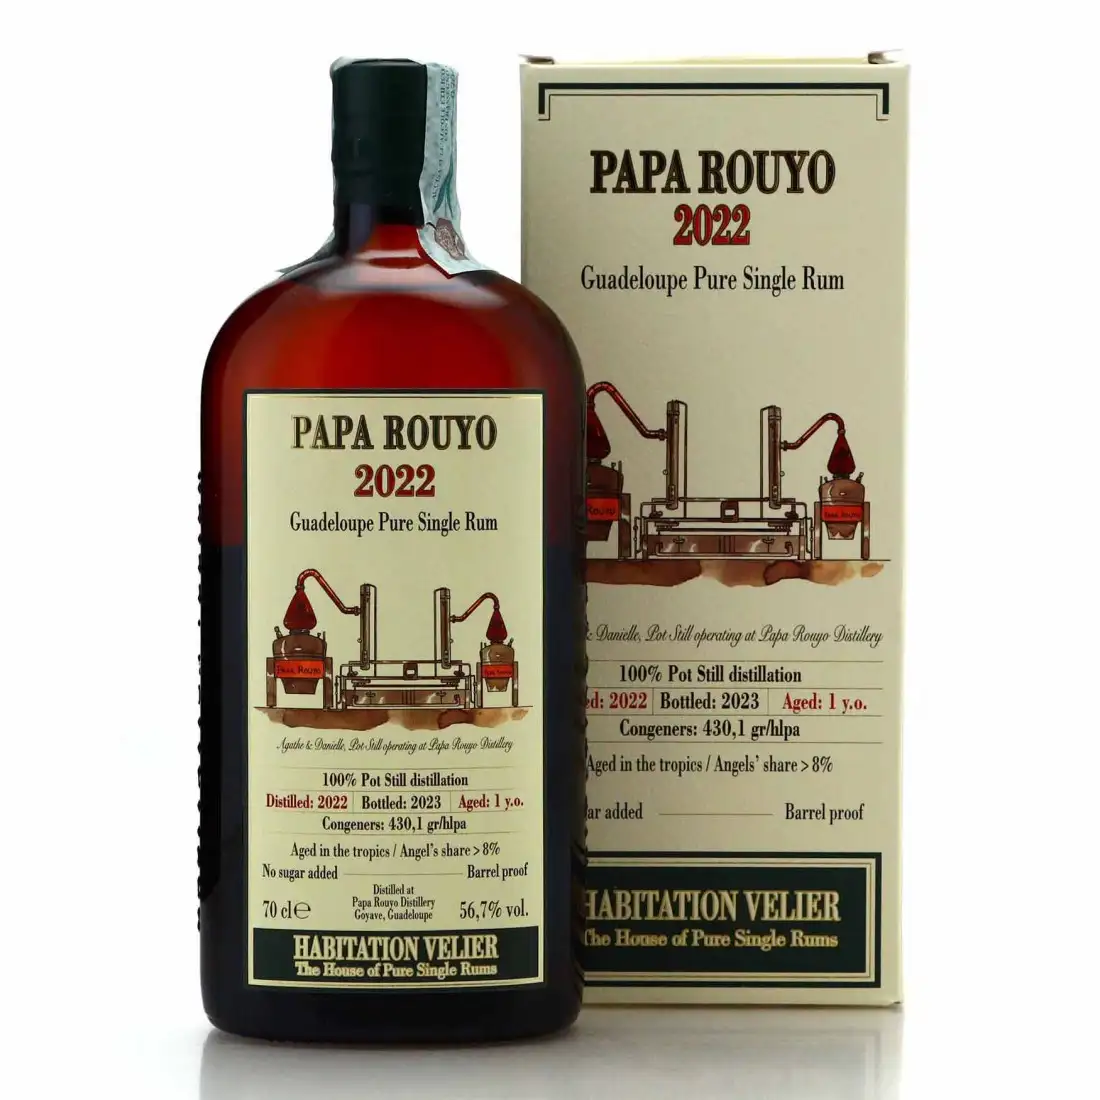 Image of the front of the bottle of the rum Papa Rouyo